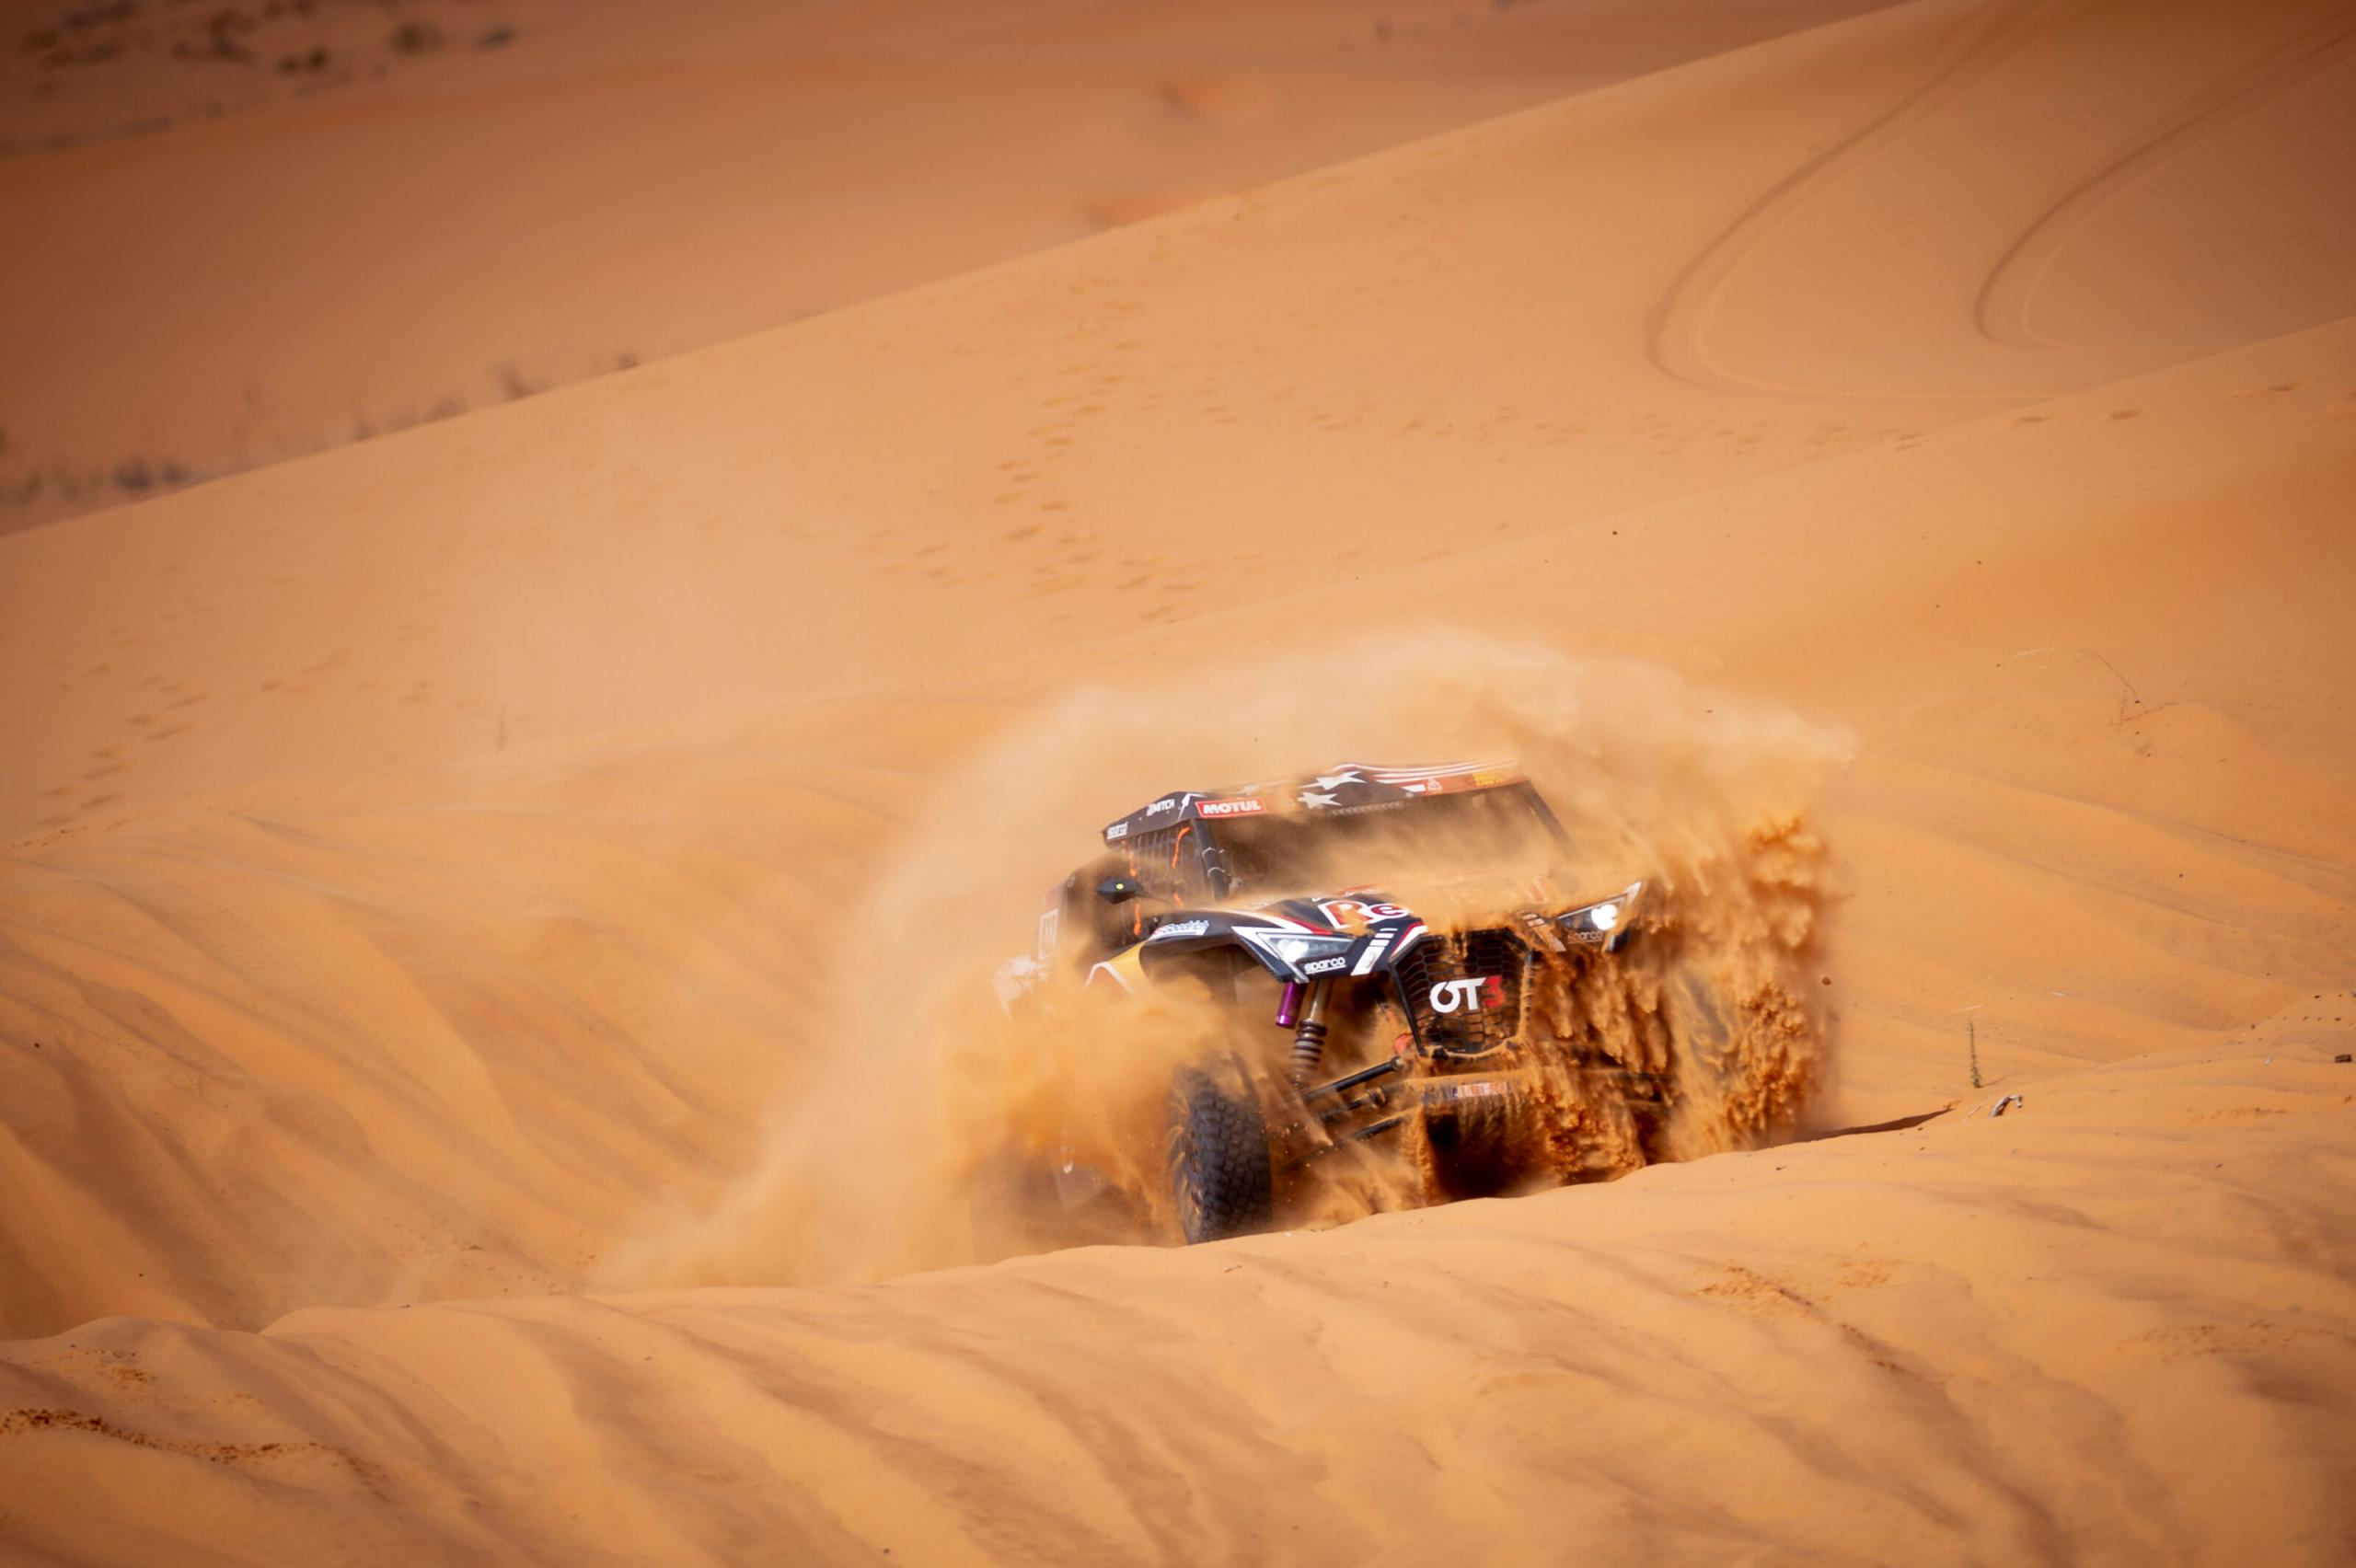 Mitch Guthrie at stage 6 of the 2020 Dakar Rally